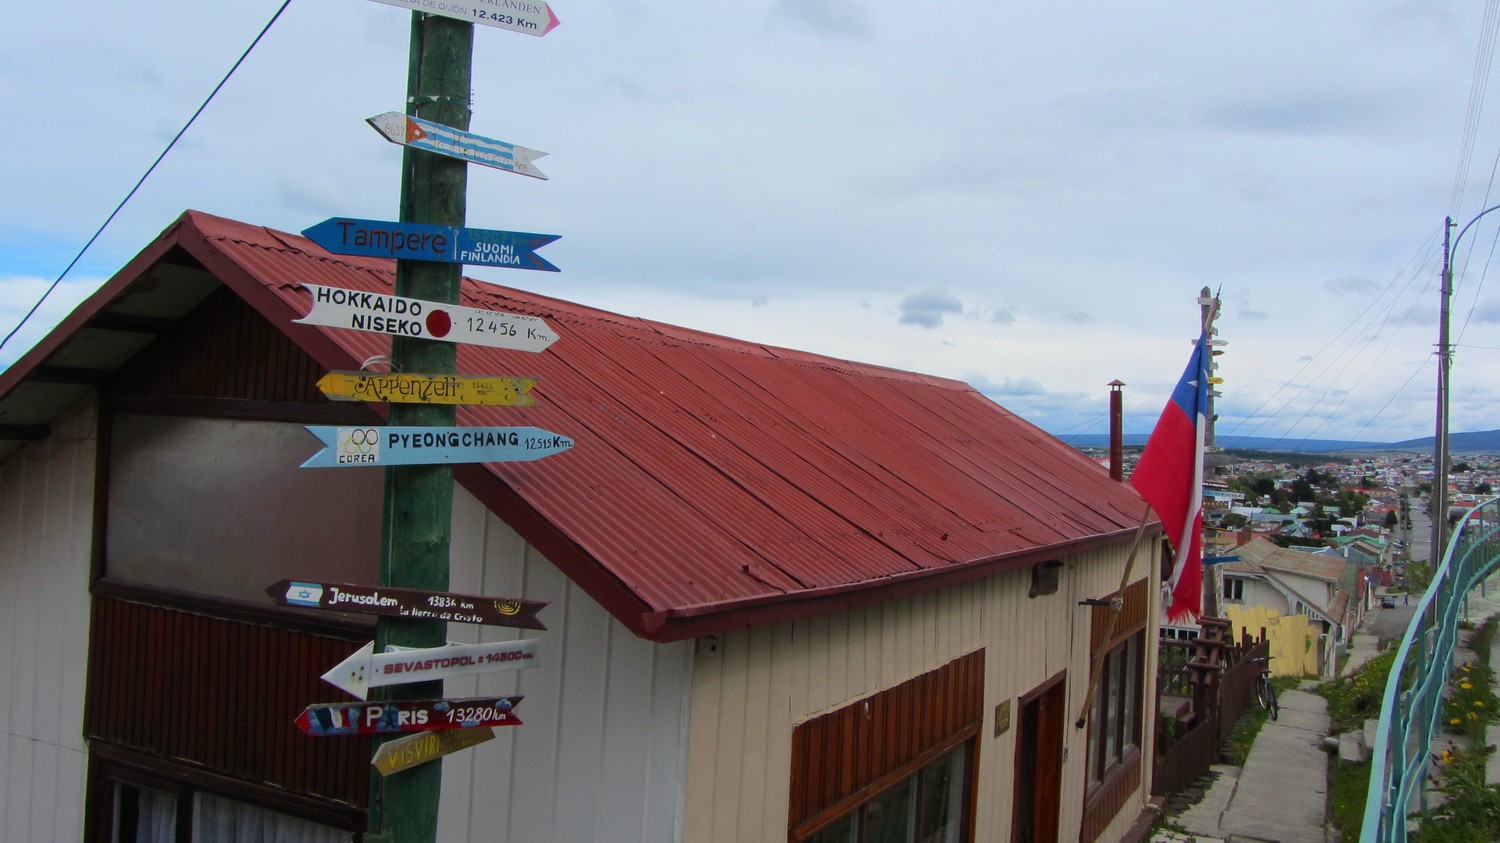 Distancies of some original towns of immigrants to Punta Arenas